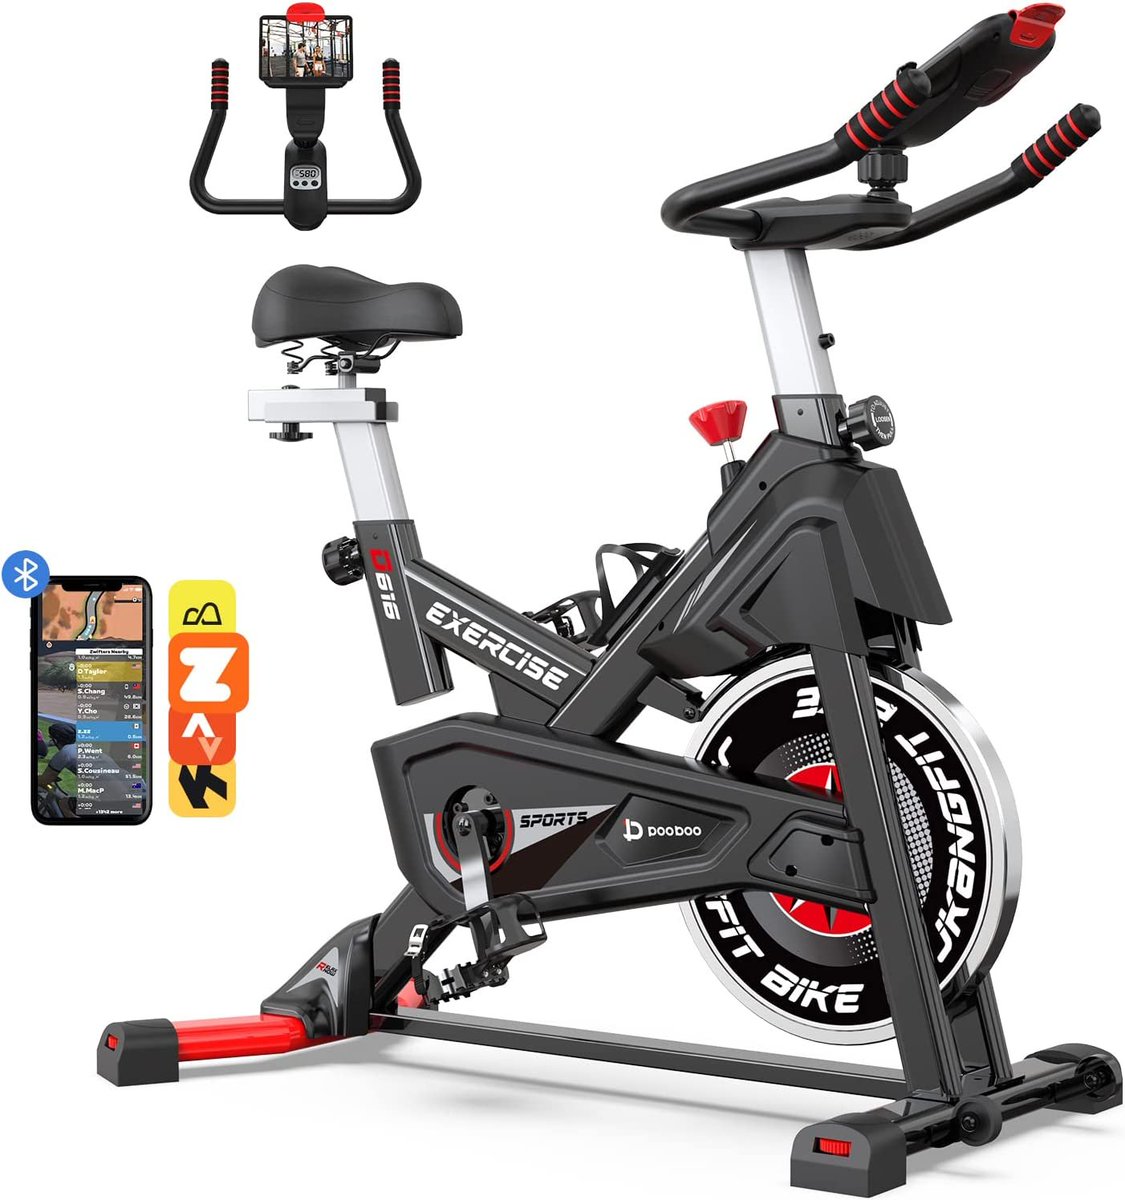 The synergy pro magnetic indoor cycling bike for 2023
sonbestreviews.com/synergy-pro-ma…

#cyclingbikes #biking #outdooractivity #fitnessmotivation #healthyhabits #adventuretime #moderncycling #sustainableliving #innovativetechnology